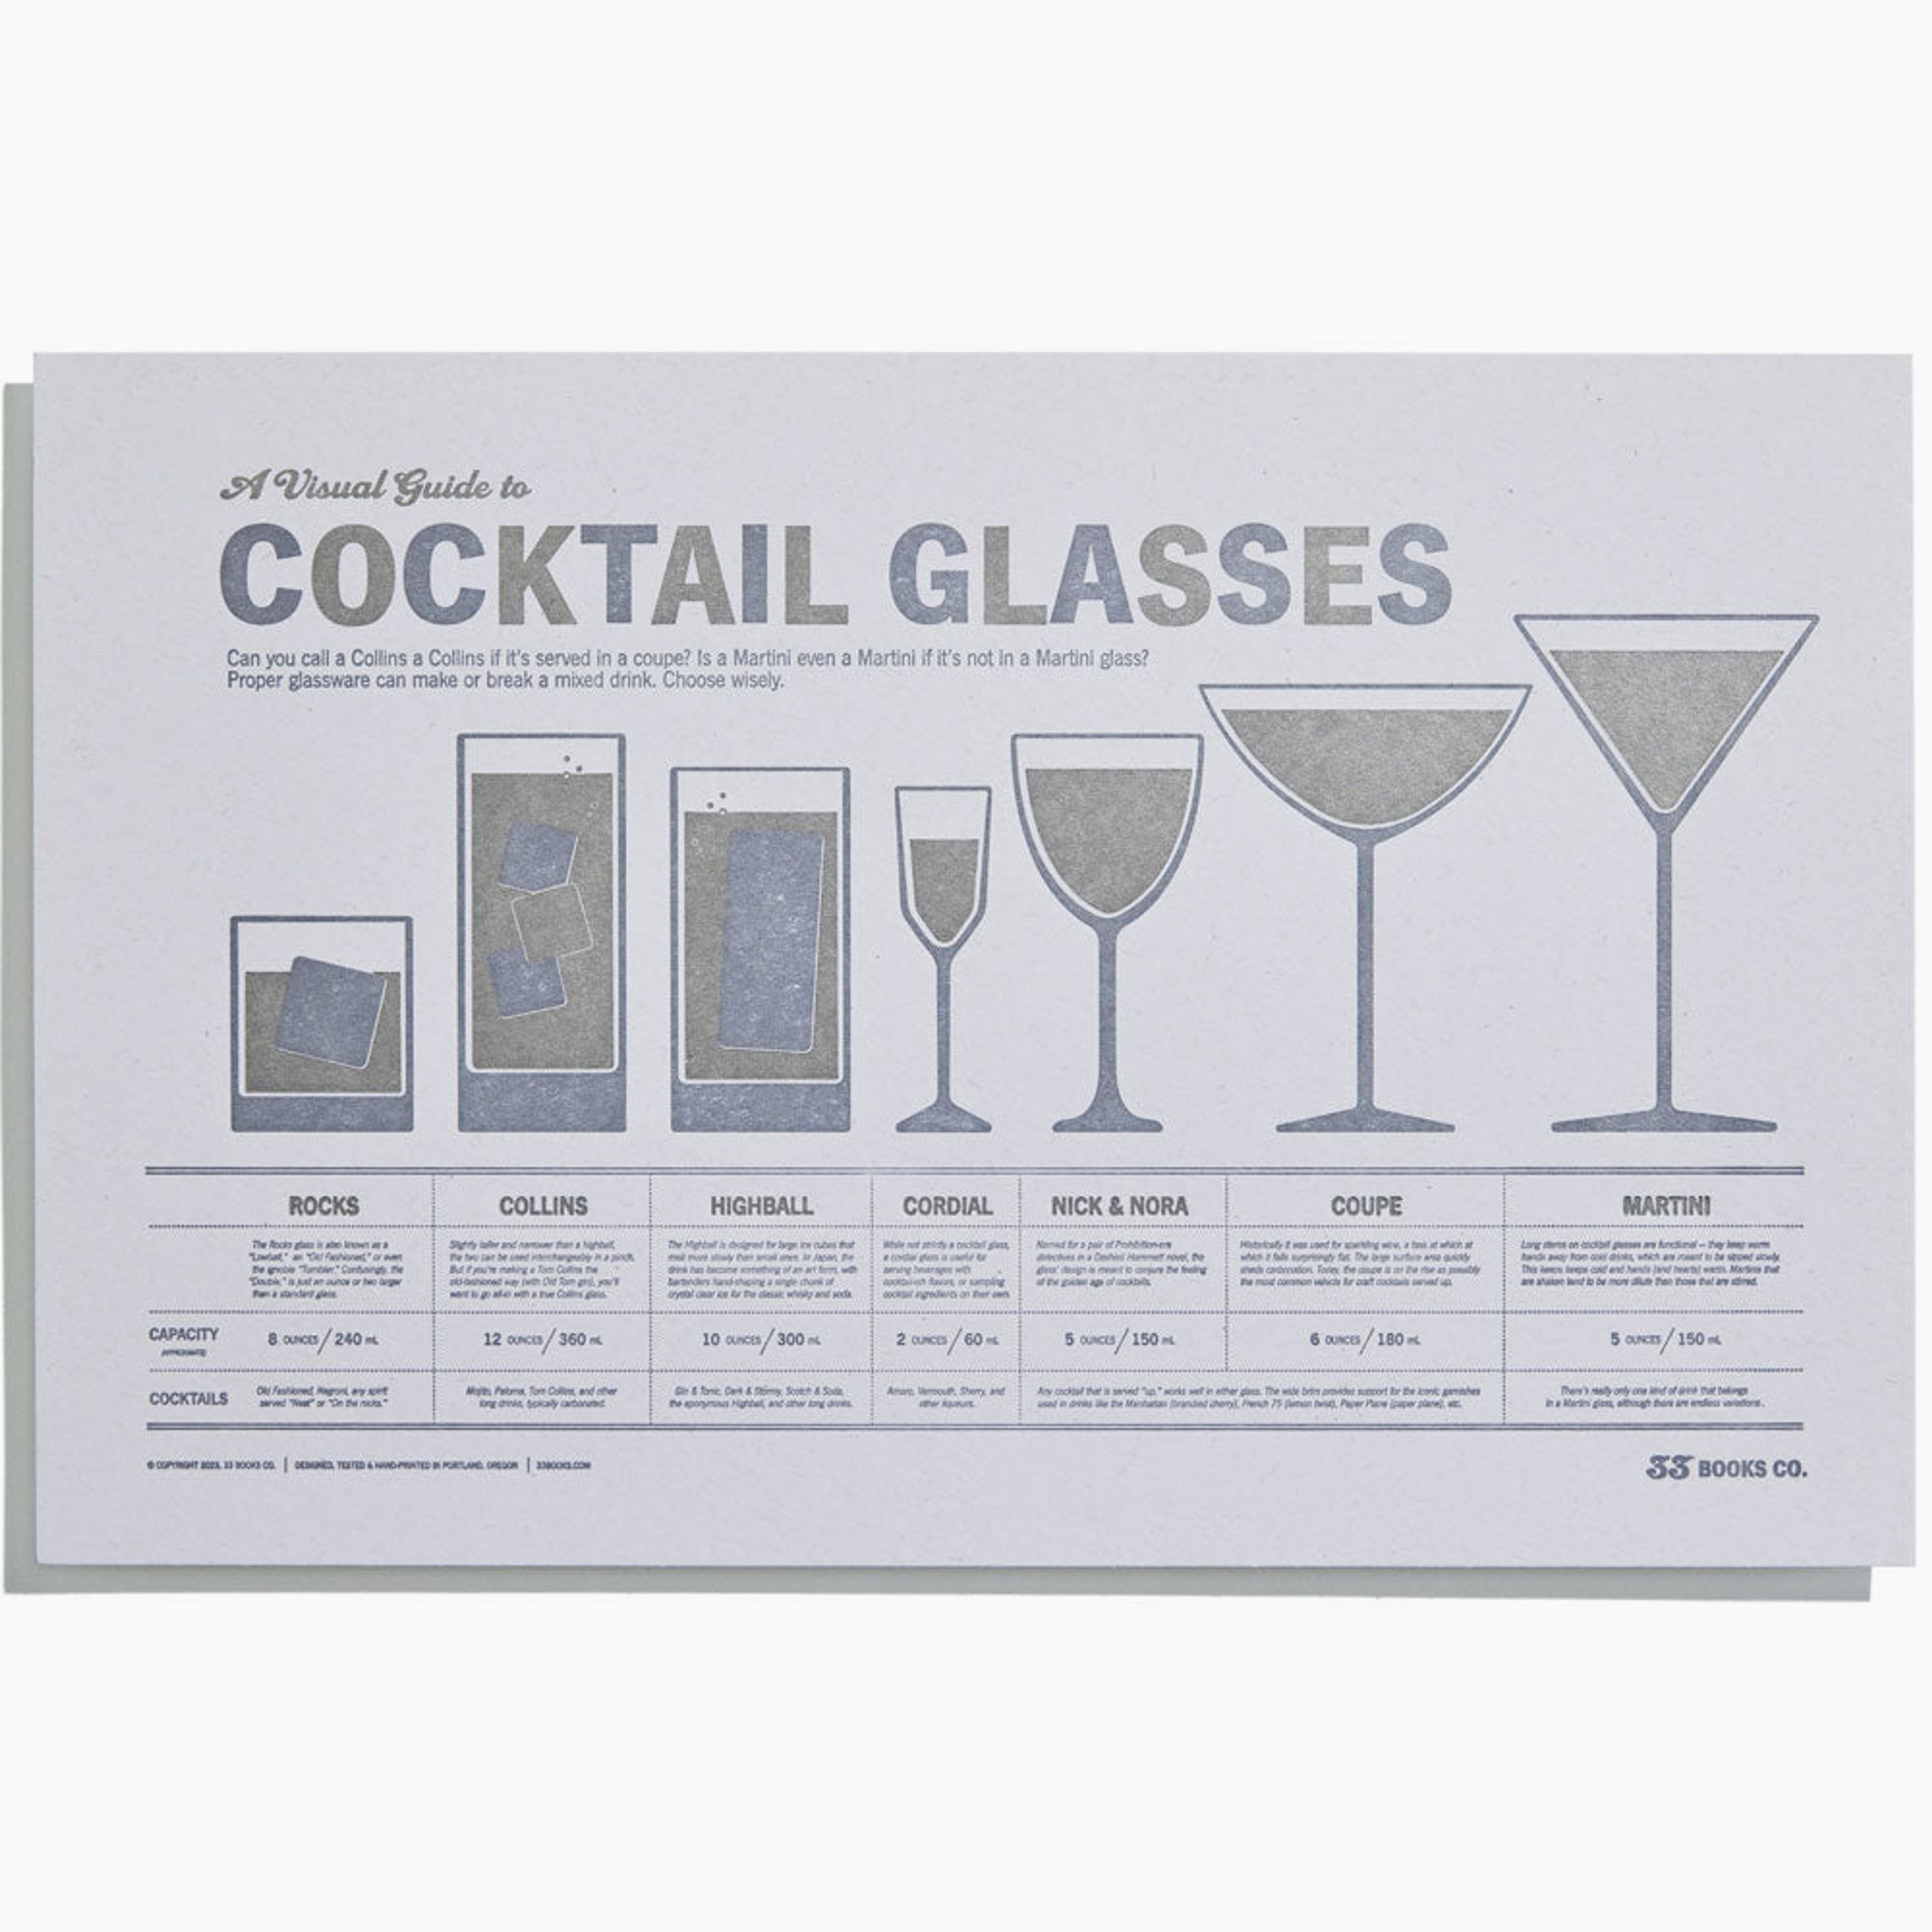 A Visual Guide to Cocktail Glasses Letterpress Print